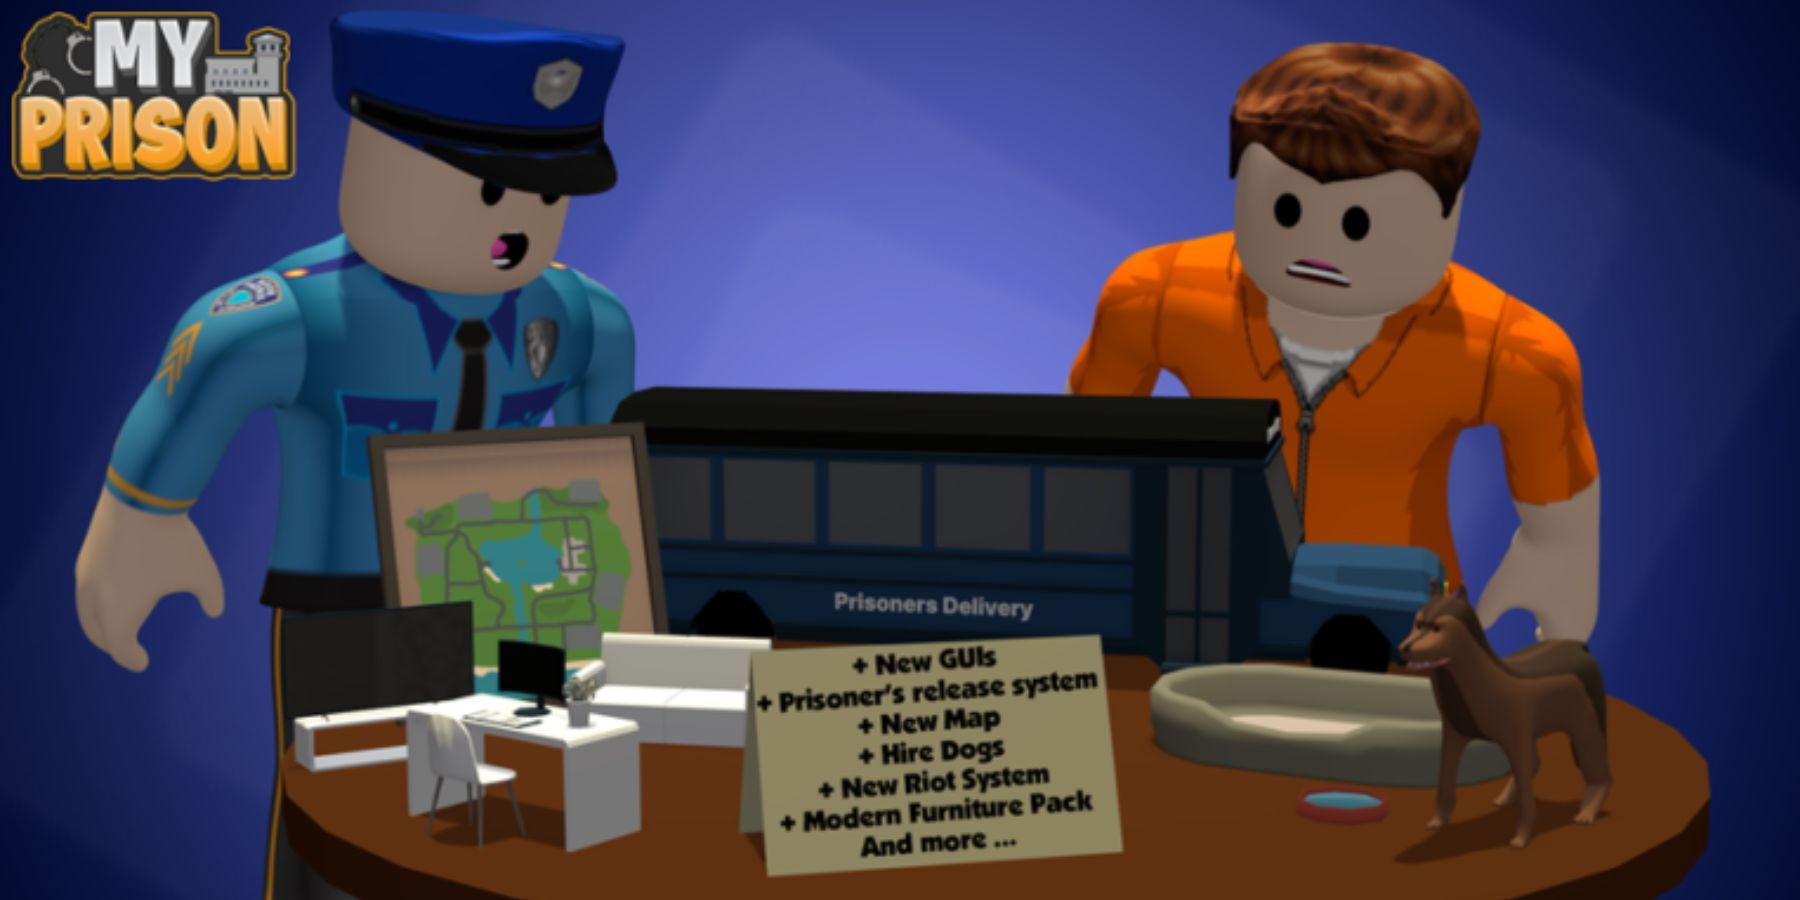 Roblox: My Prison characters